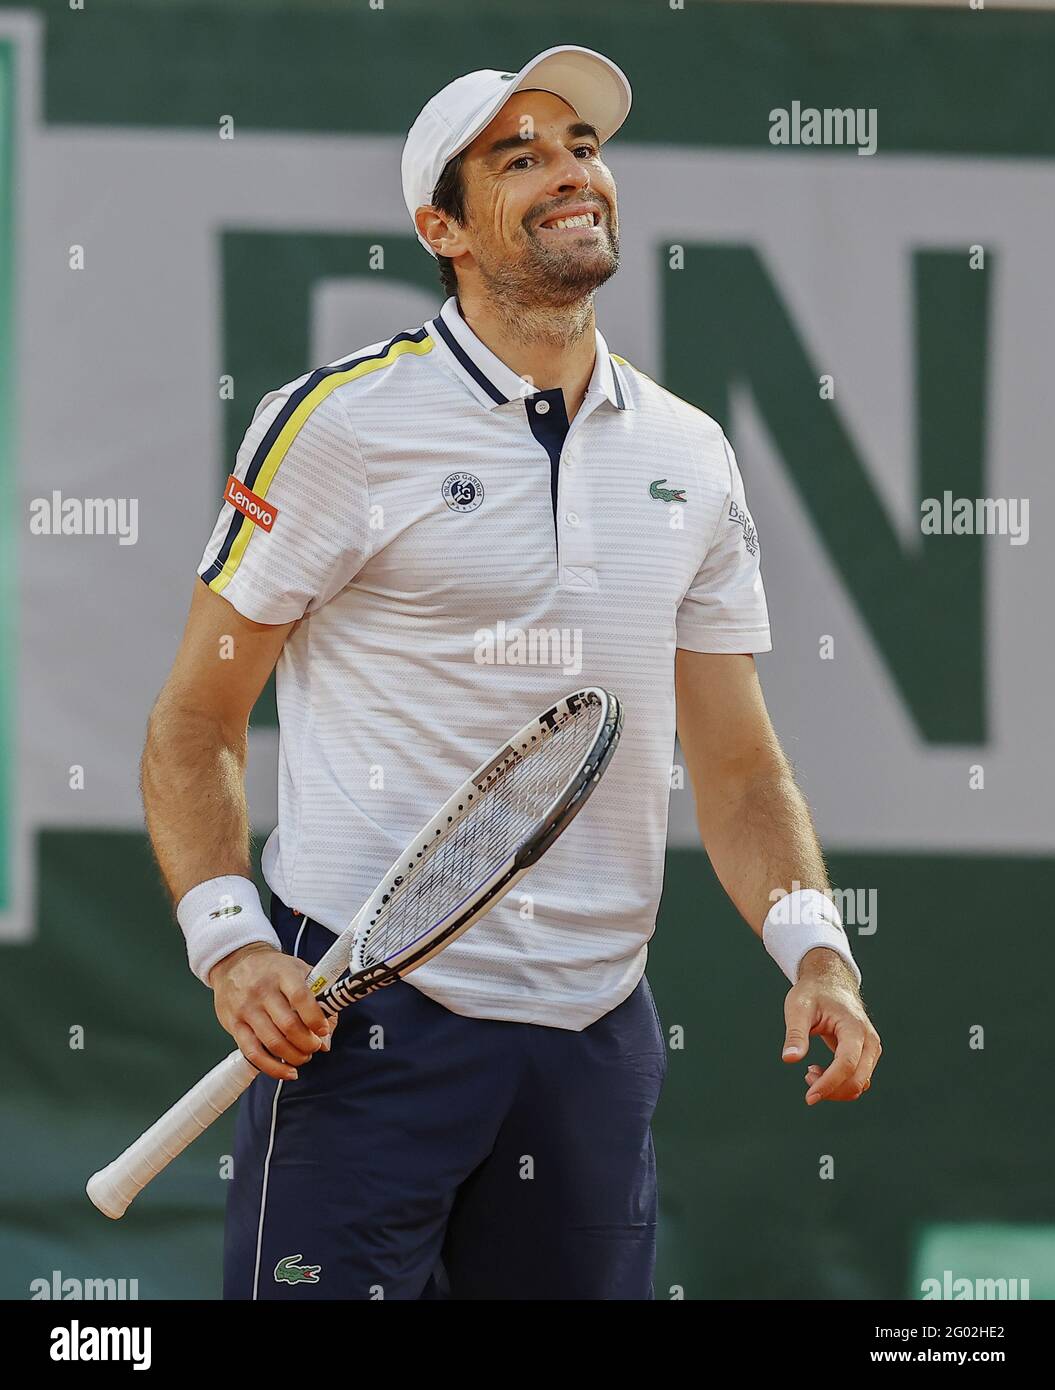 Jeremy Chardy of France during Roland-Garros 2021, Grand Slam tennis  tournament on May 30, 2021 at Roland-Garros stadium in Paris, France -  Photo Nicol Knightman / DPPI Stock Photo - Alamy